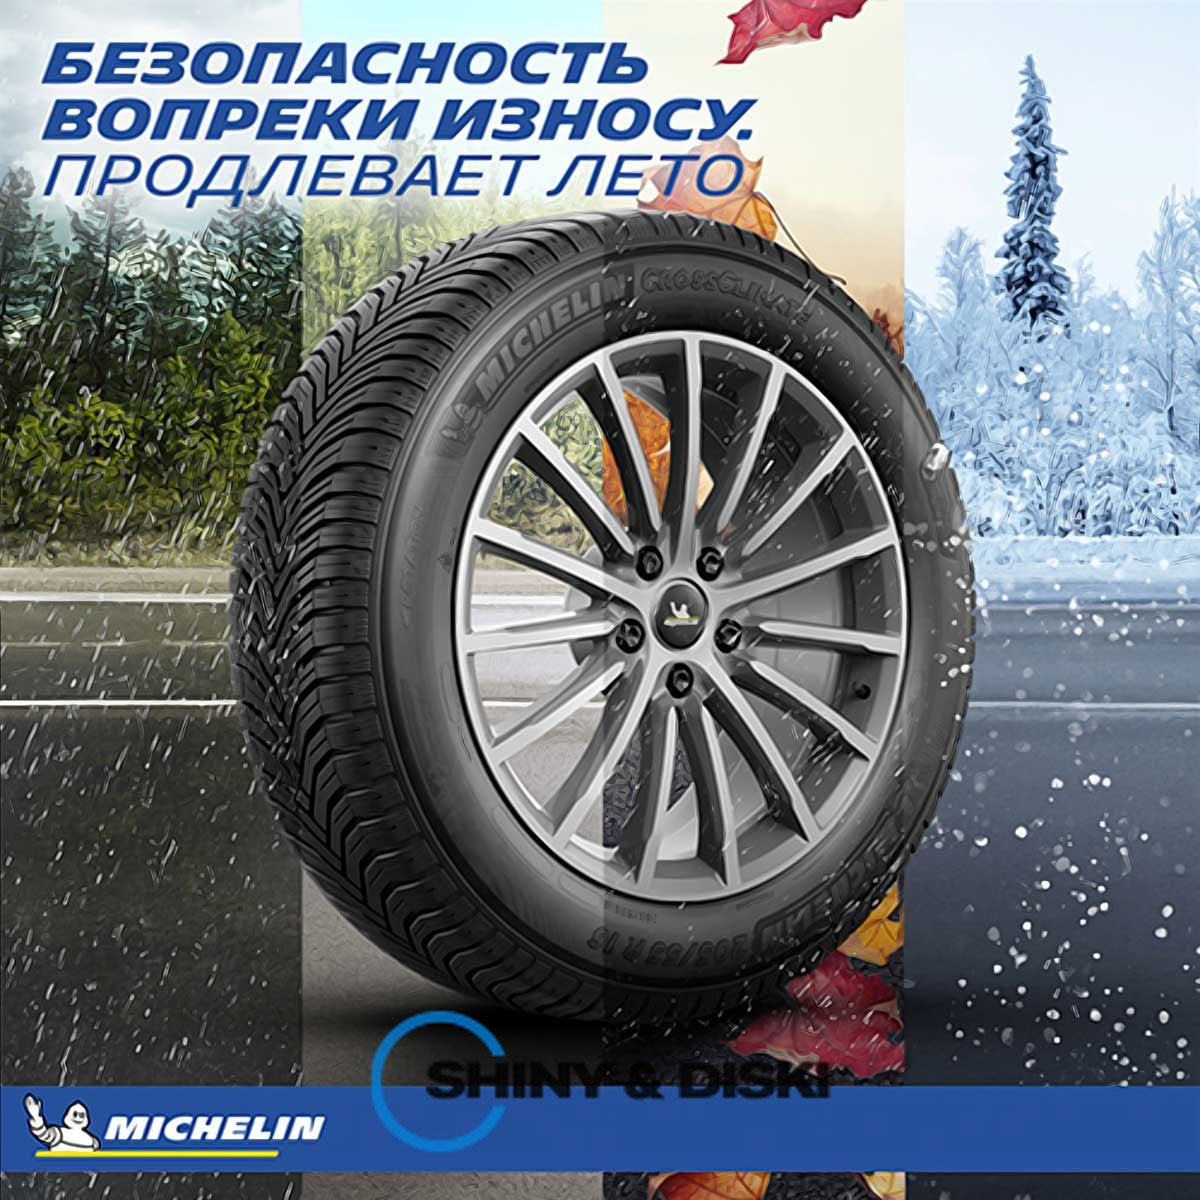 покрышки michelin cross climate+ 215/55 r16 97v xl